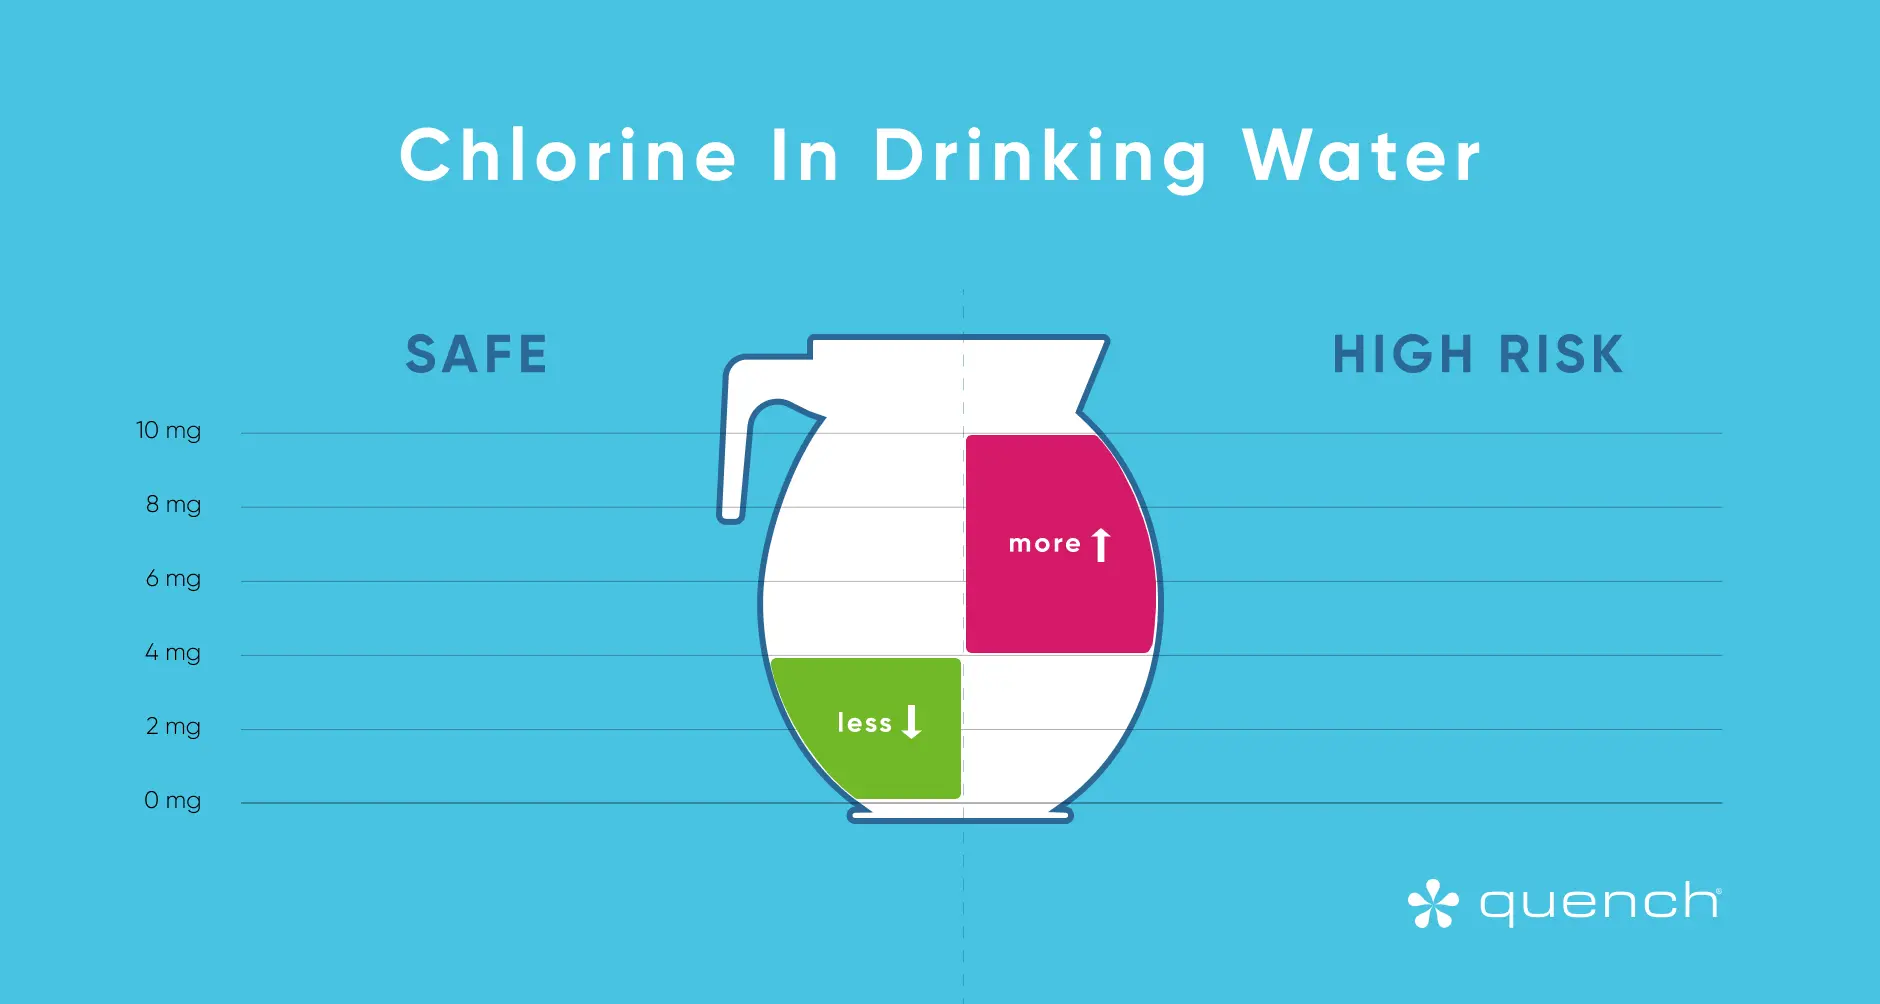 Infographic showing chlorine levels safe to drink